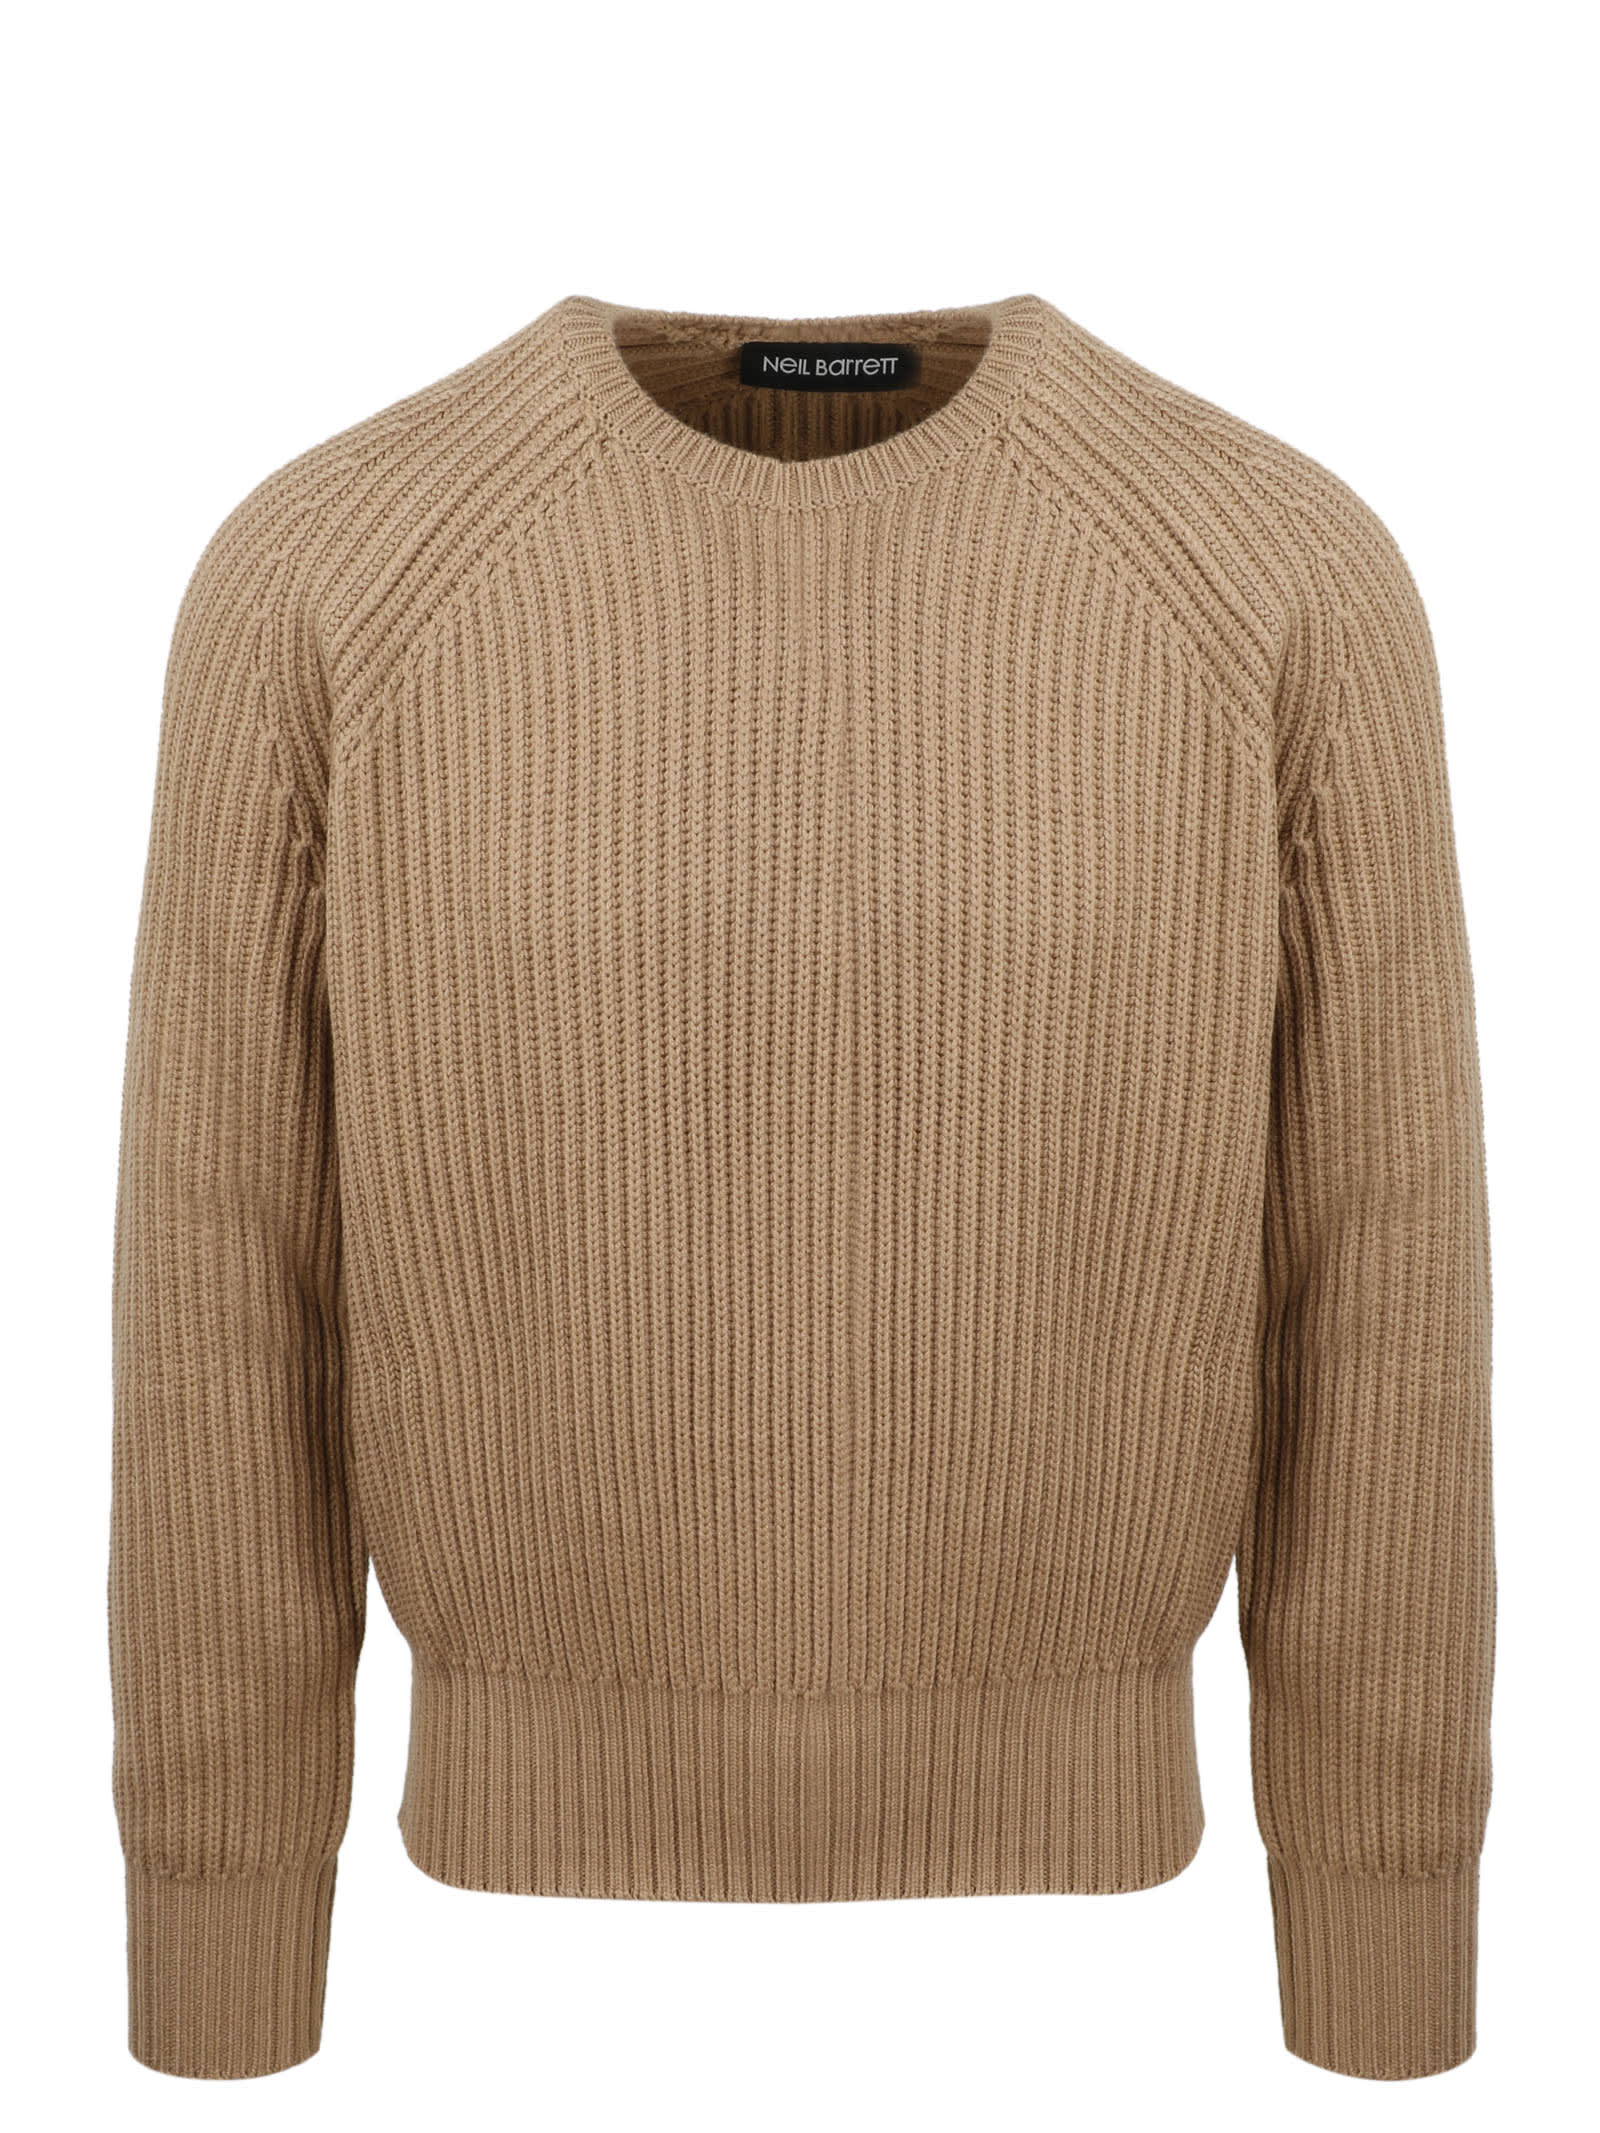 Neil Barrett Sweater With Pearcing